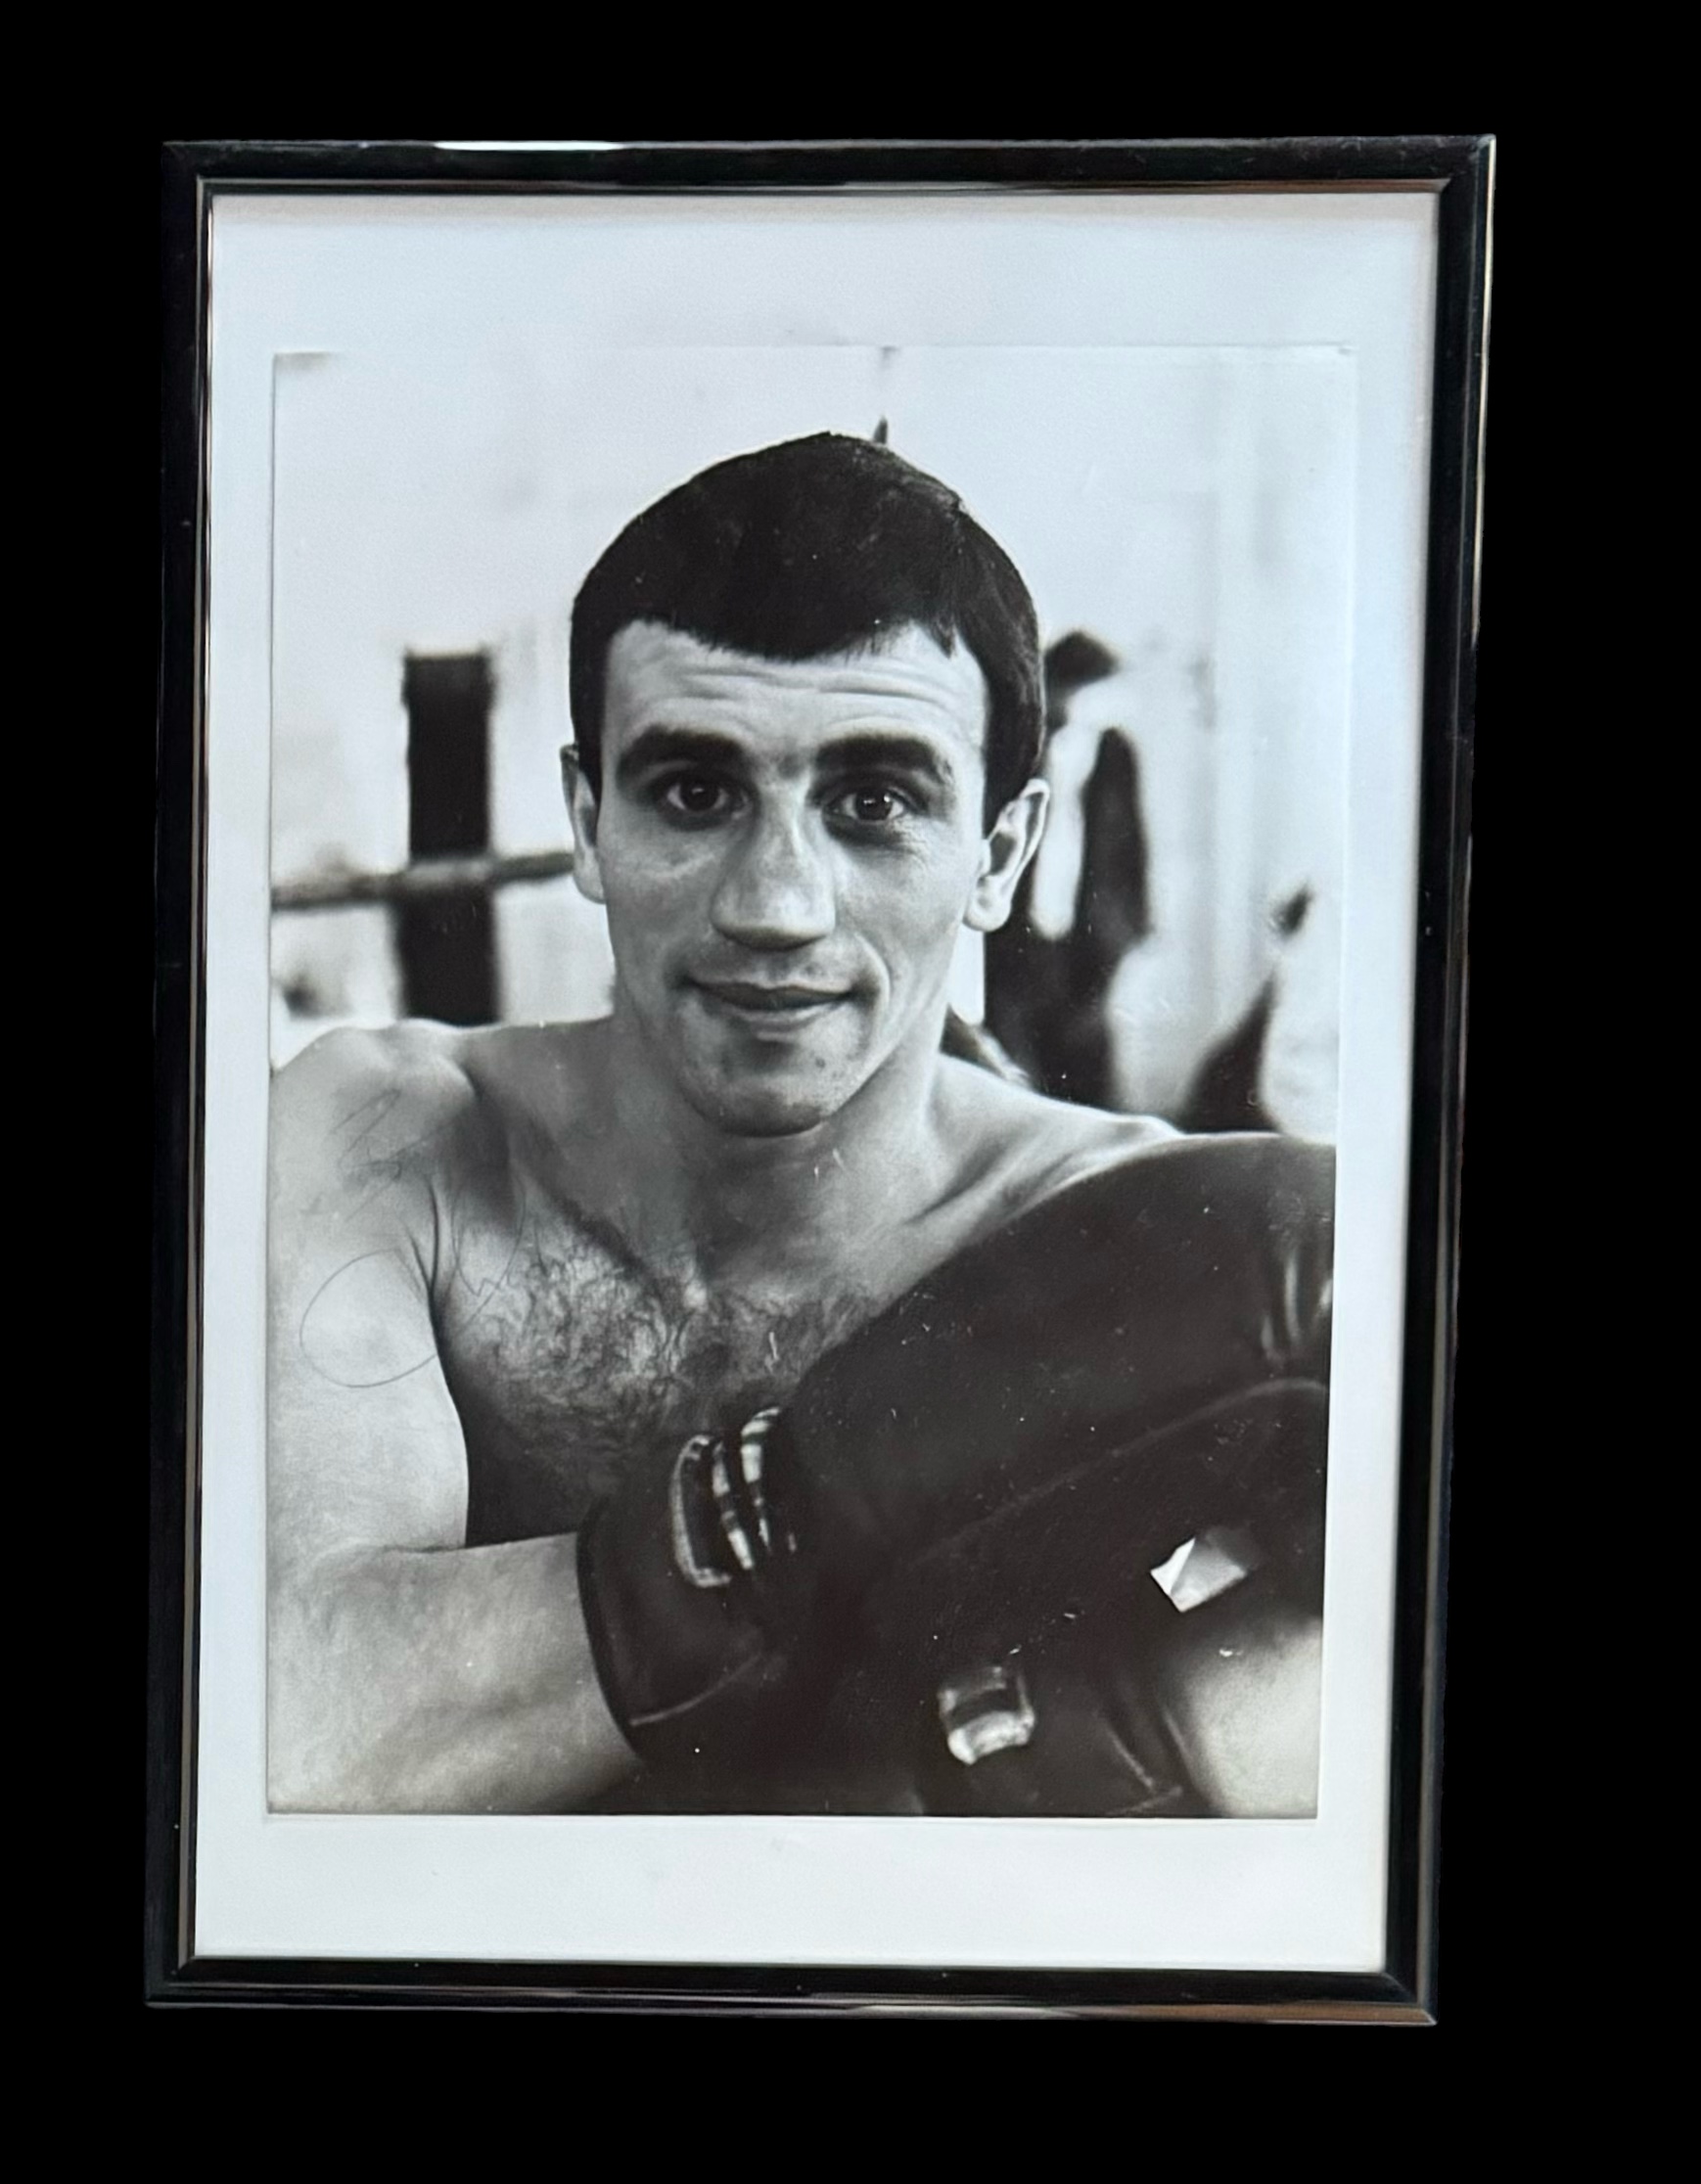 Charlie Magri signed black and white photo. Framed to approx size 12x8inch. Good condition. All